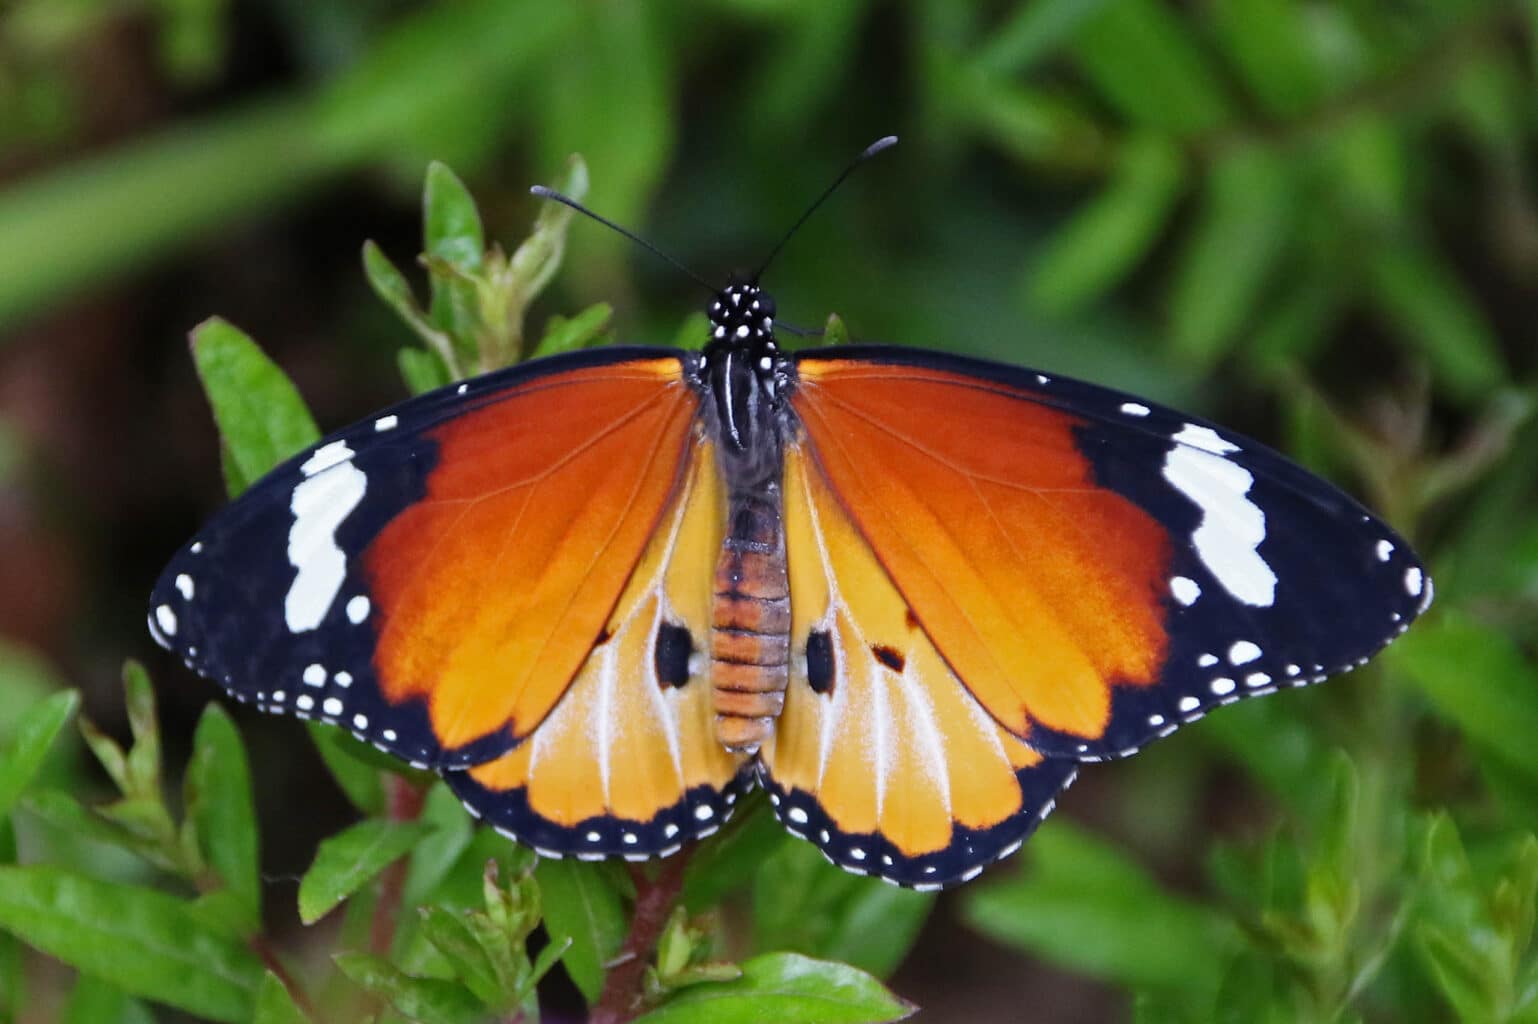 Bright orange, black, and white endemic butterfly against greenery.